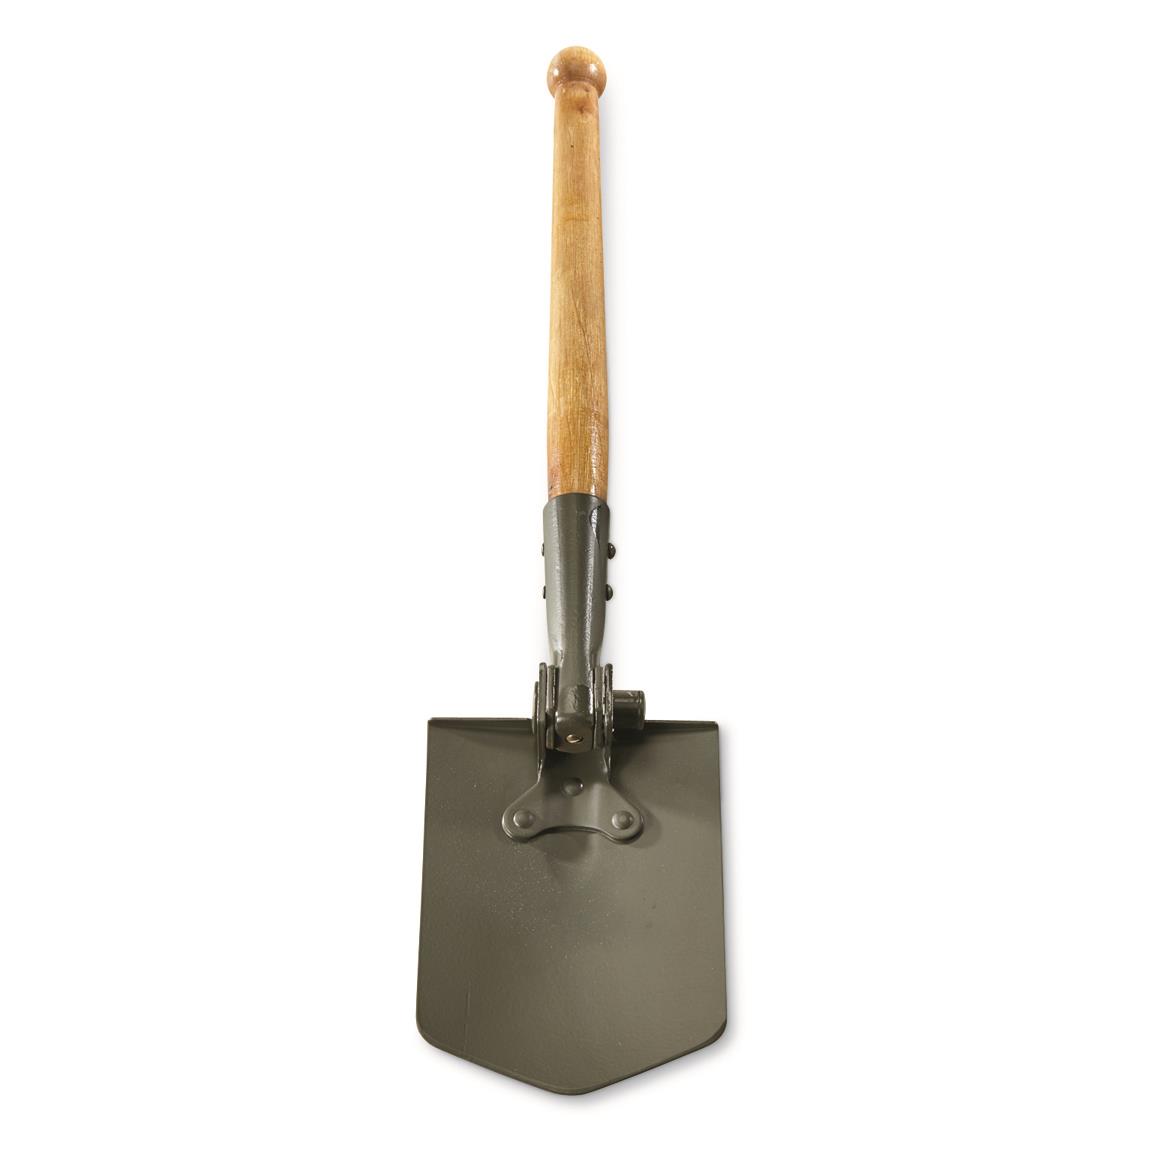 German Army Style Olive Drab Shovel and Cover Small Military Spade New